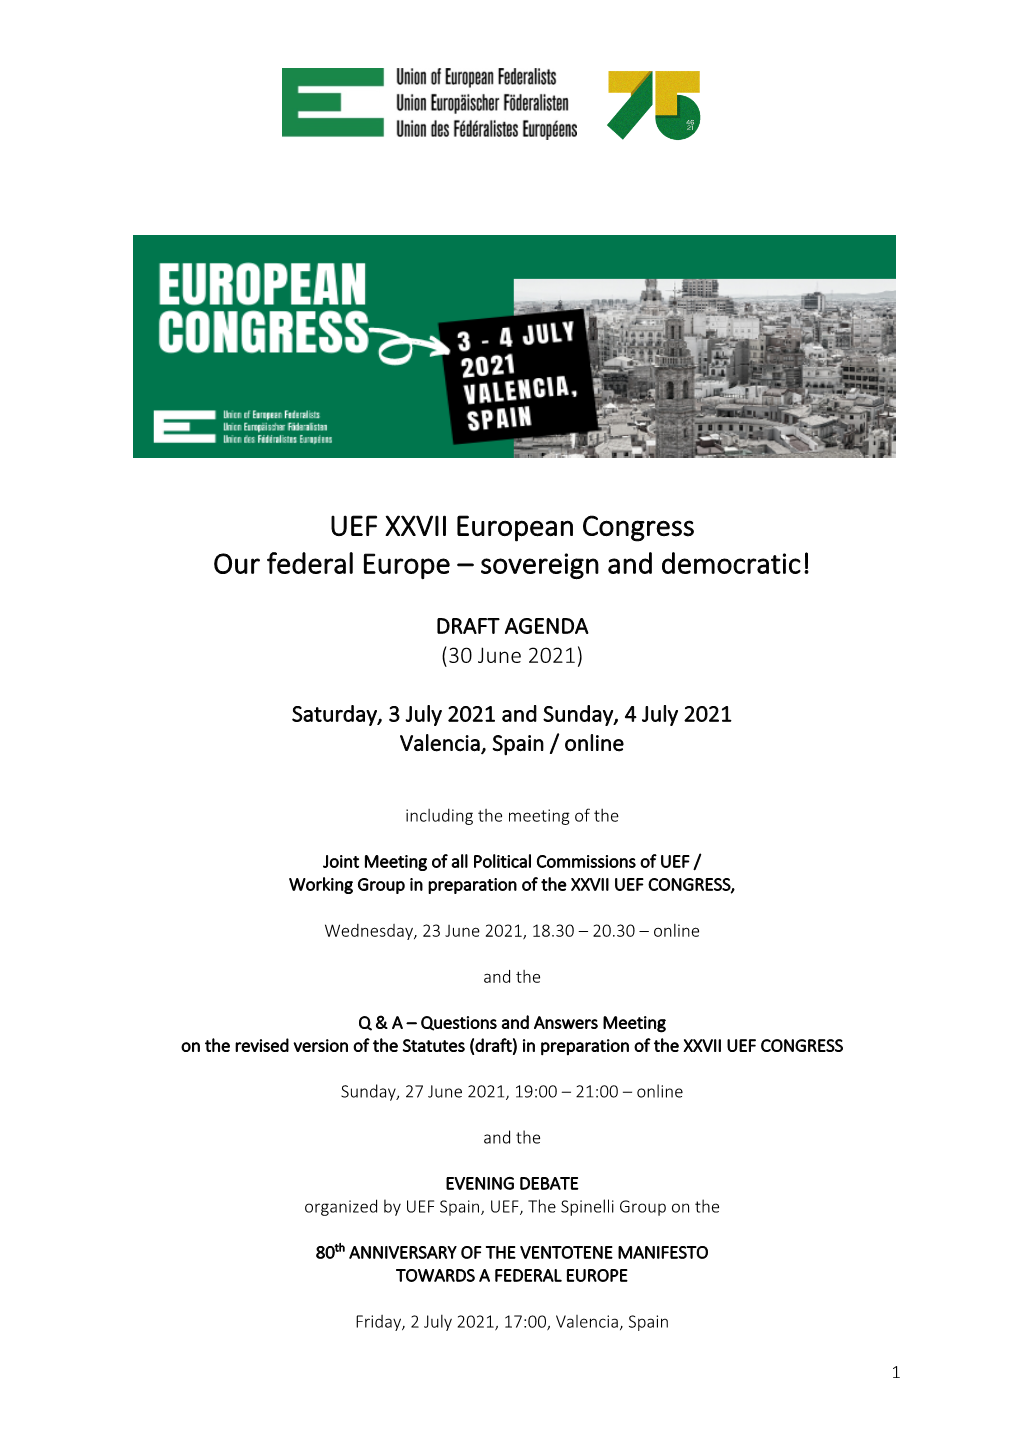 UEF XXVII European Congress Our Federal Europe – Sovereign and Democratic!